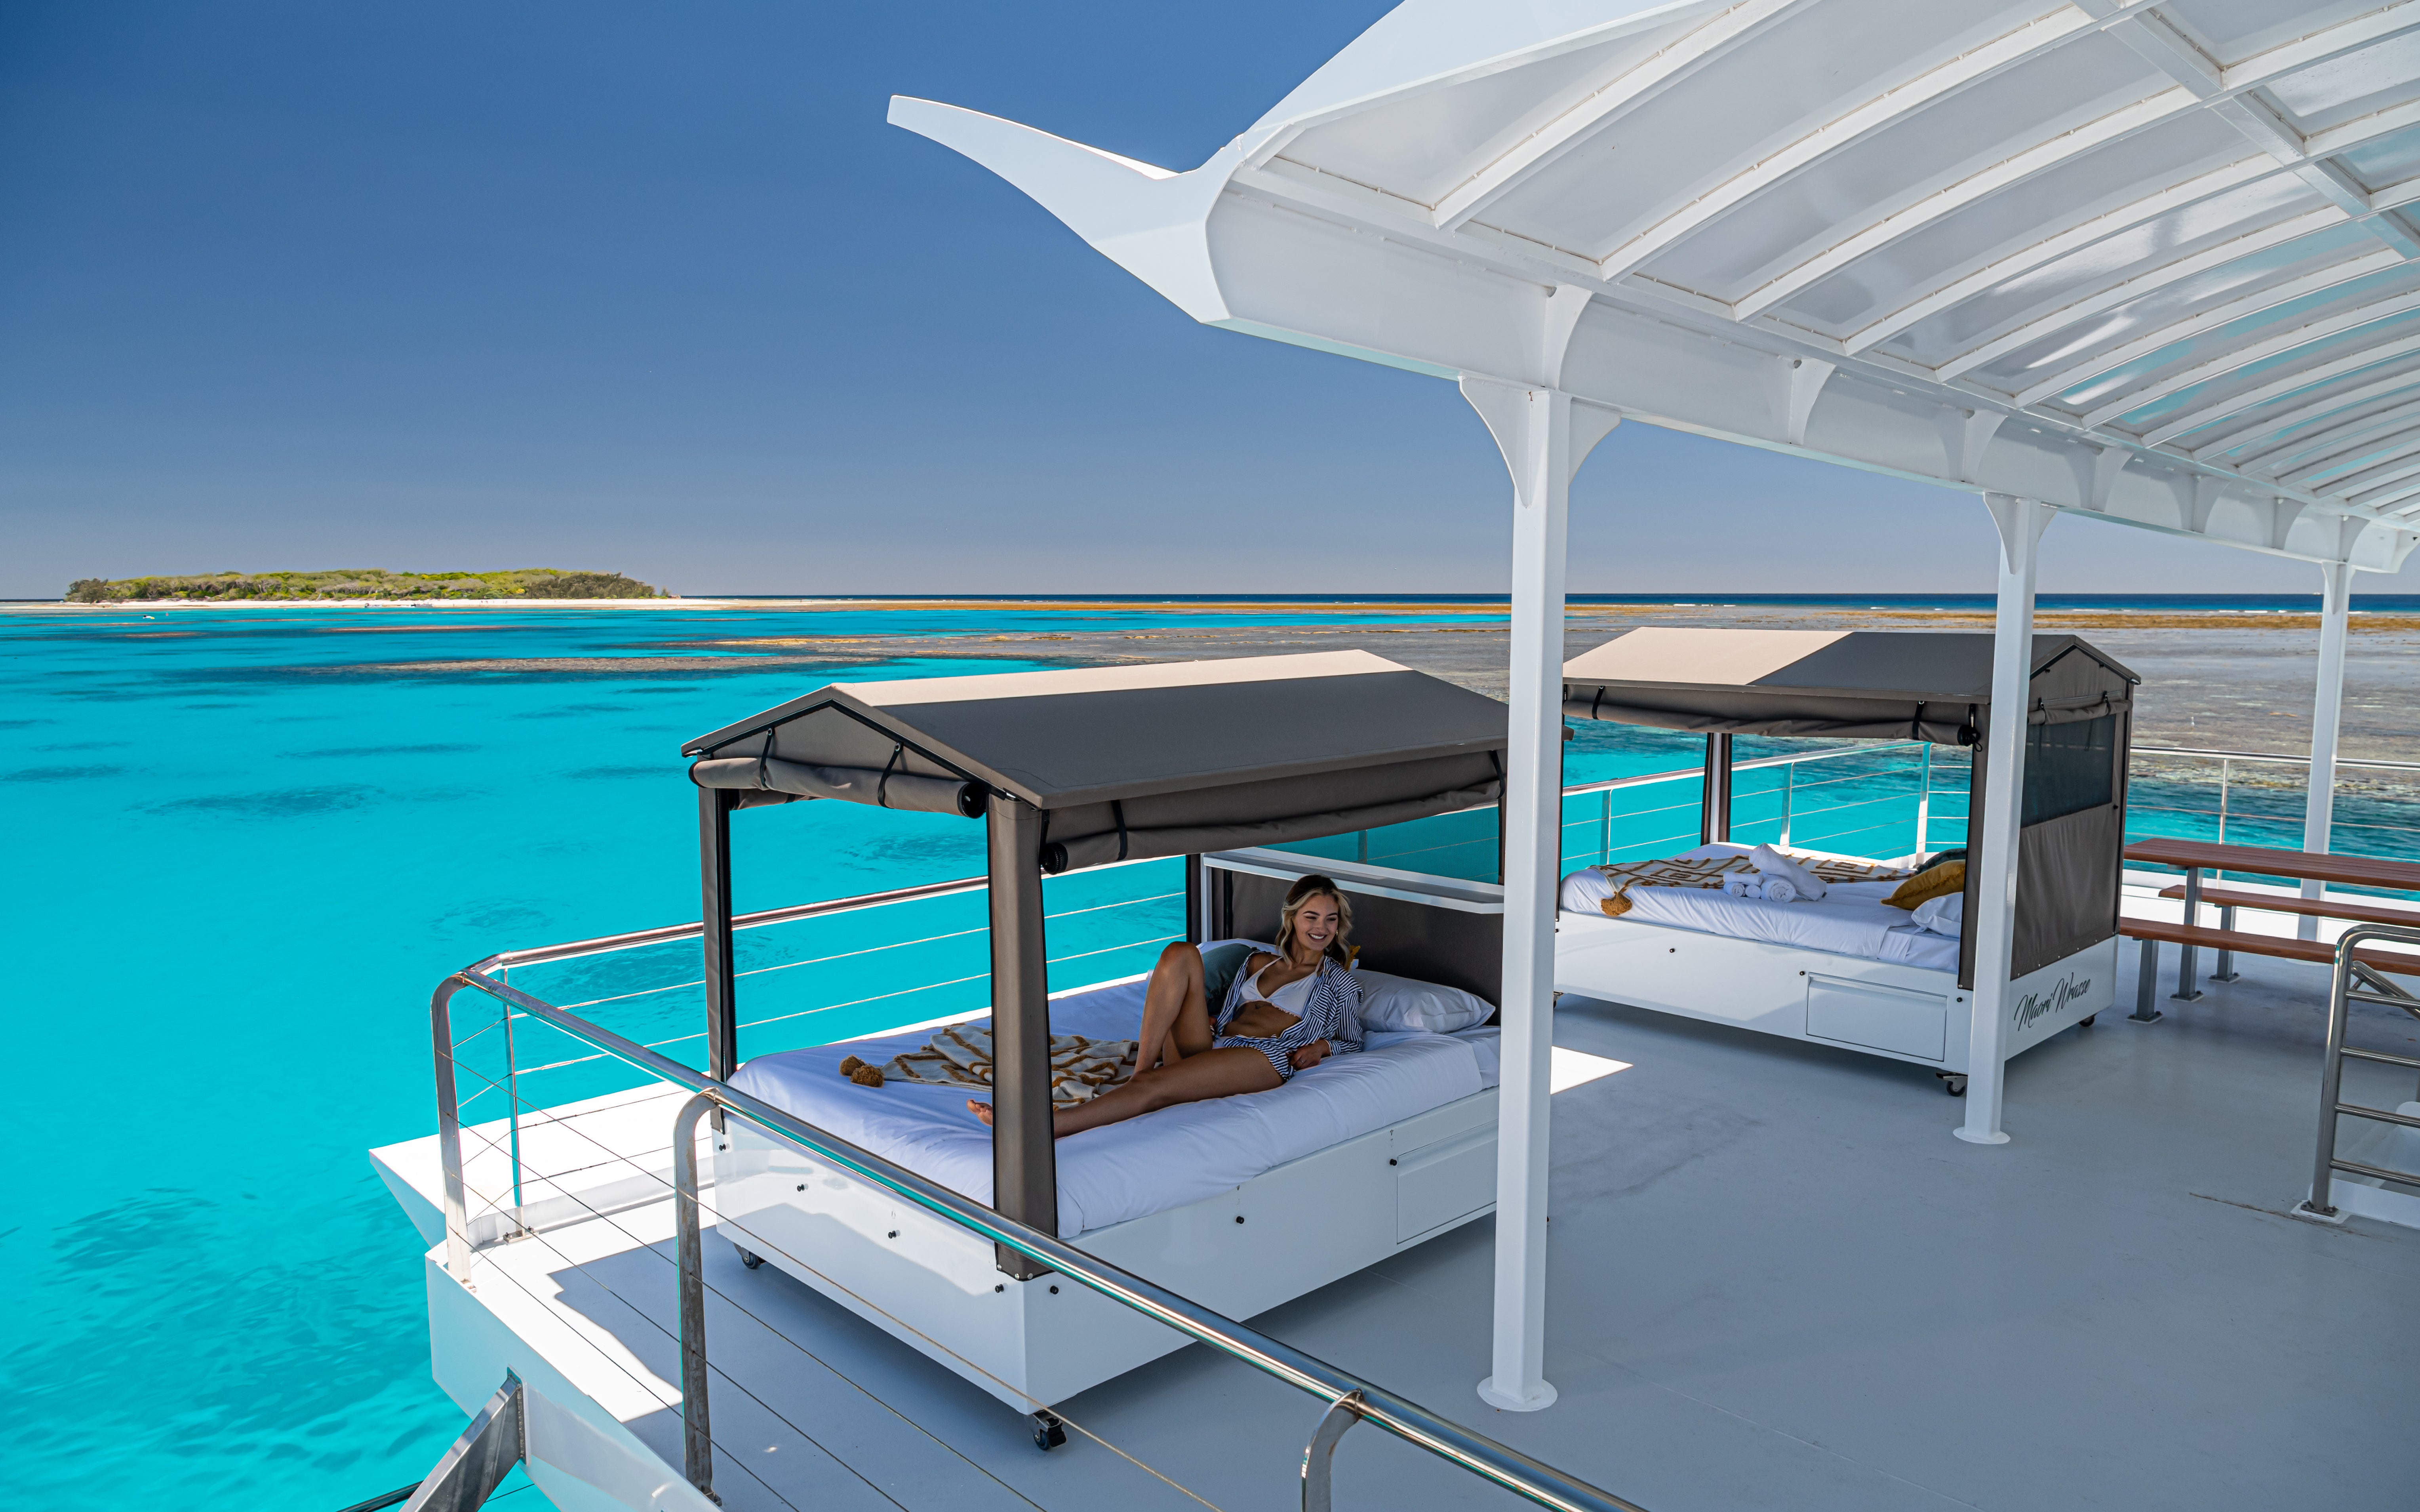 Room with a view: the Lady Musgrave HQ pontoon lets guests sleep on the reef